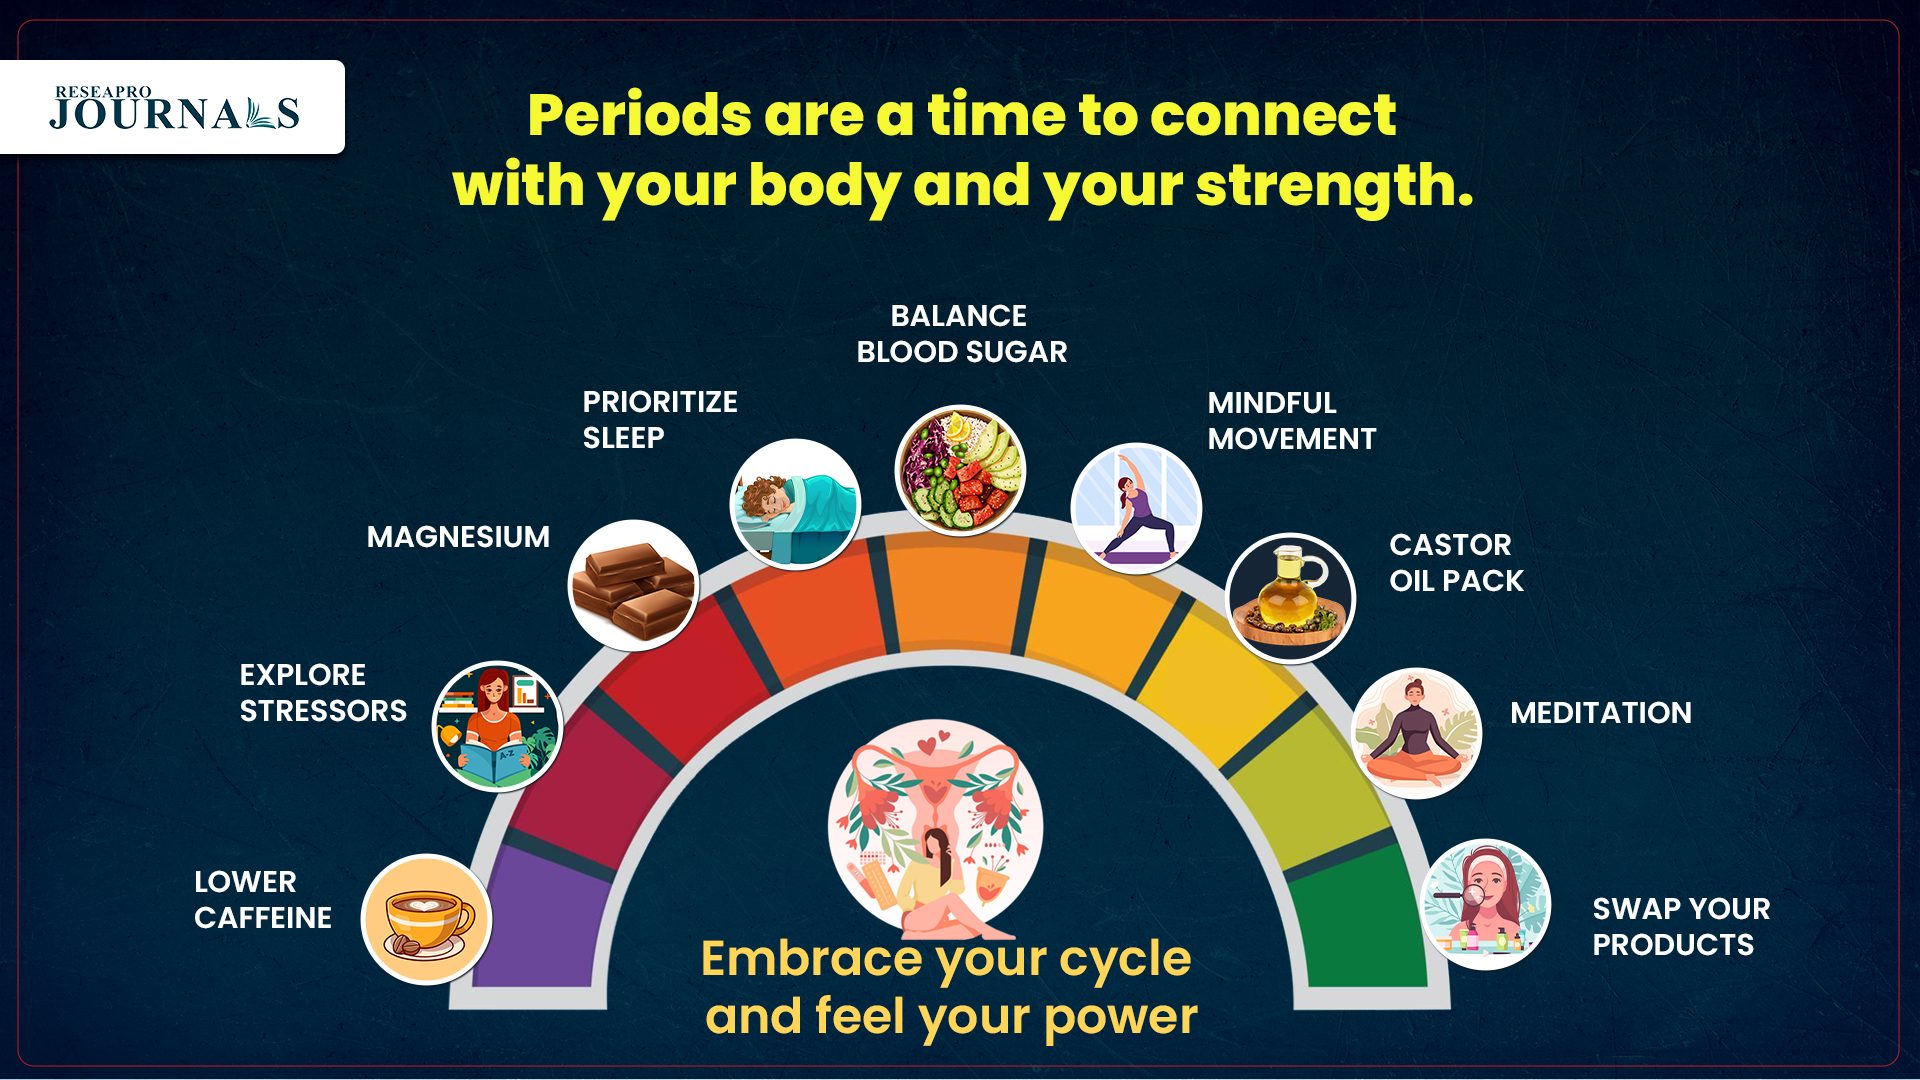 Periods are a time to connect with your body and your strength. Embrace your cycle and feel your power.